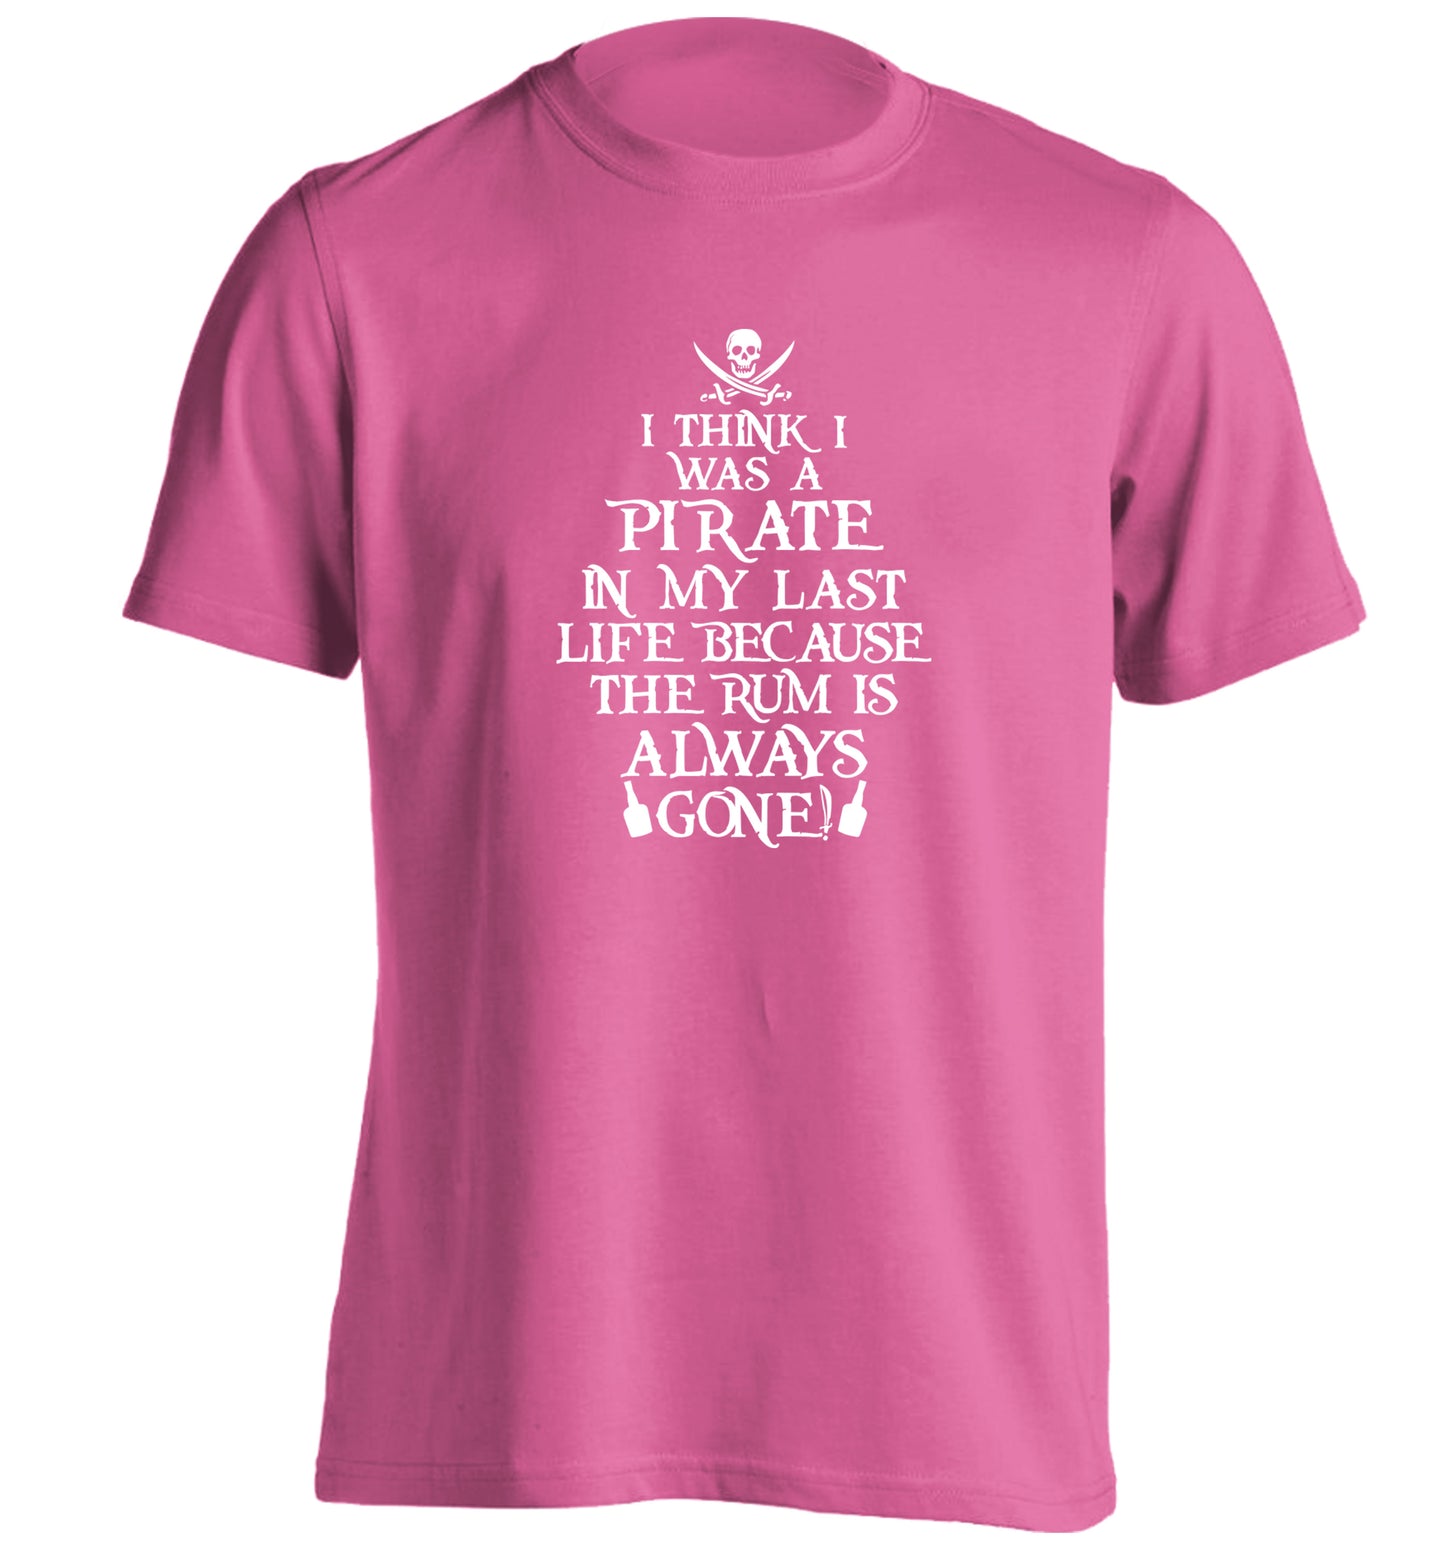 I think I was a pirate in my past life because the rum is always gone! adults unisex pink Tshirt 2XL